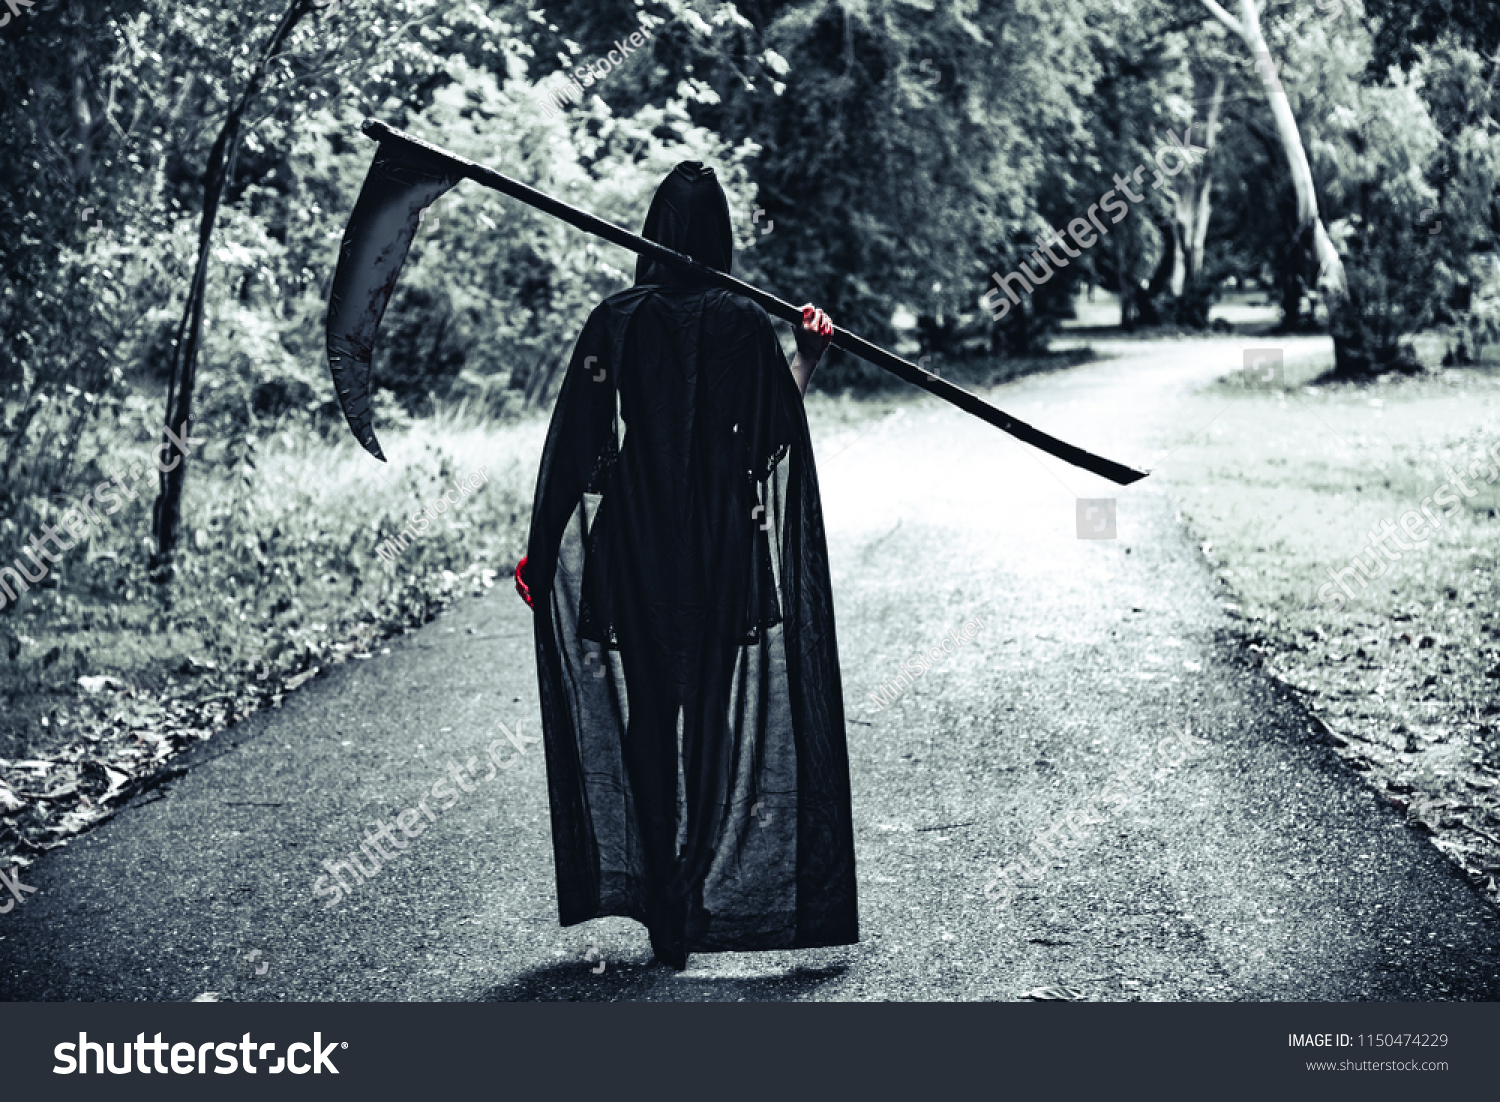 Back view of demon witch with reaper and red blood on hands walking along moon light road background. Horror and Ghost concept. Halloween day and Scary scene theme. Killer and moonlight death theme. #1150474229